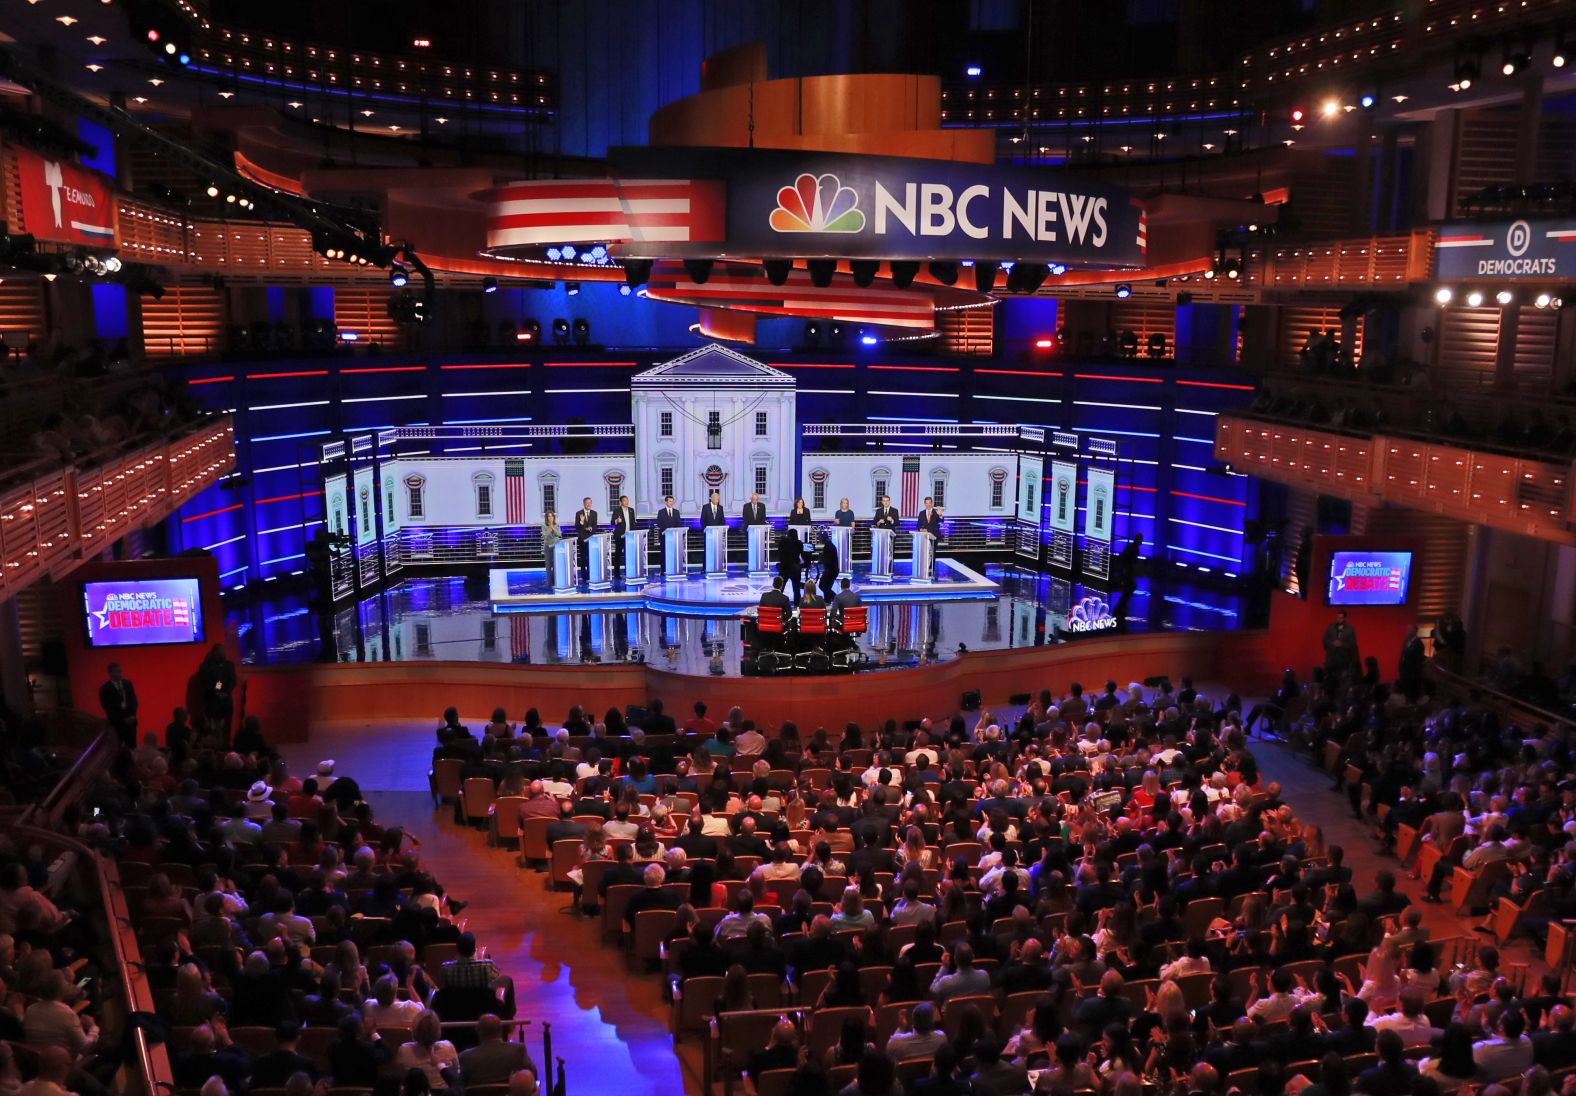 <a href="index.php?page=&url=https%3A%2F%2Fwww.cnn.com%2Fpolitics%2Flive-news%2Fdemocratic-debate-june-27-2019%2Fh_937a300a18896f3168ba87ce3d622dc6" target="_blank">The opening volleys of the second debate</a> offered an immediate contrast between the candidates' competing ideas about the direction of the party.